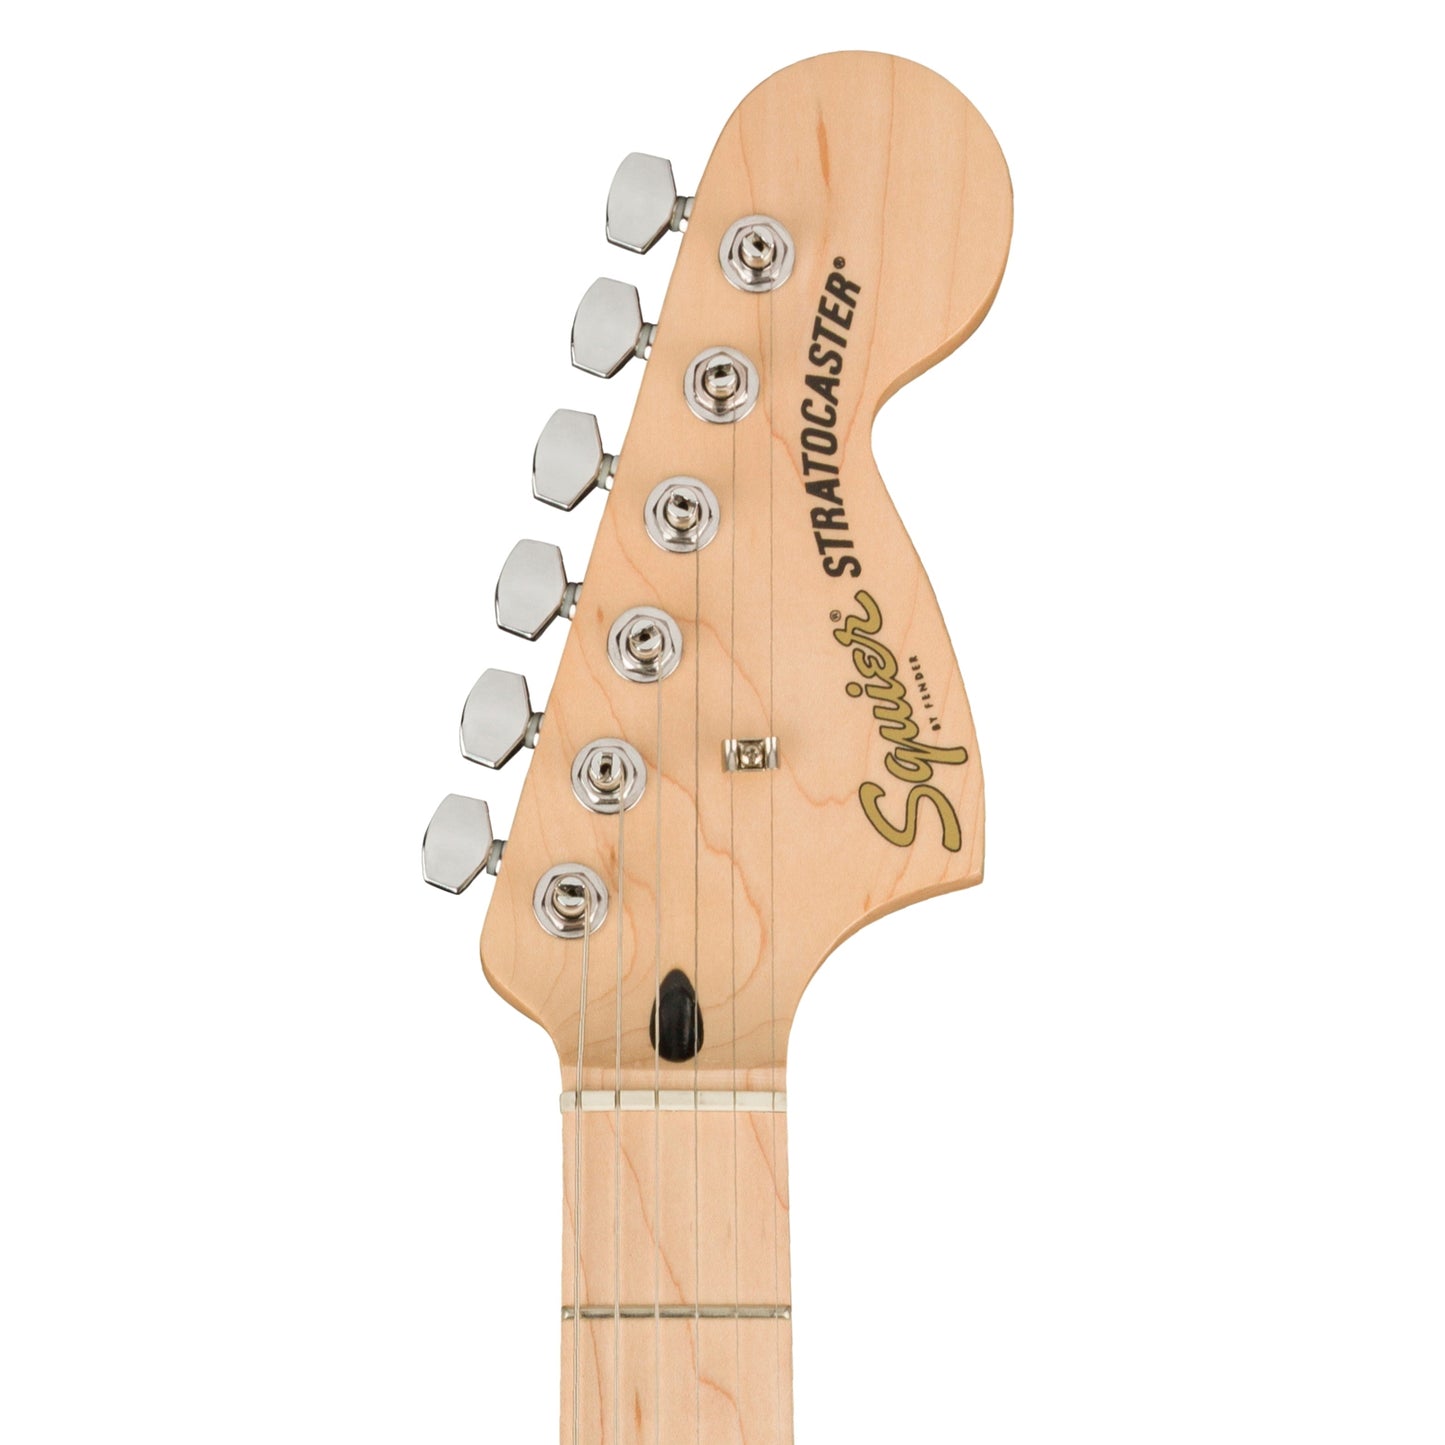 Squier by Fender Affinity Stratocaster Electric Guitar with SSS Pickup, 2-point Tremolo, 5-way Switching (Sunburst, White, Black, Blue)